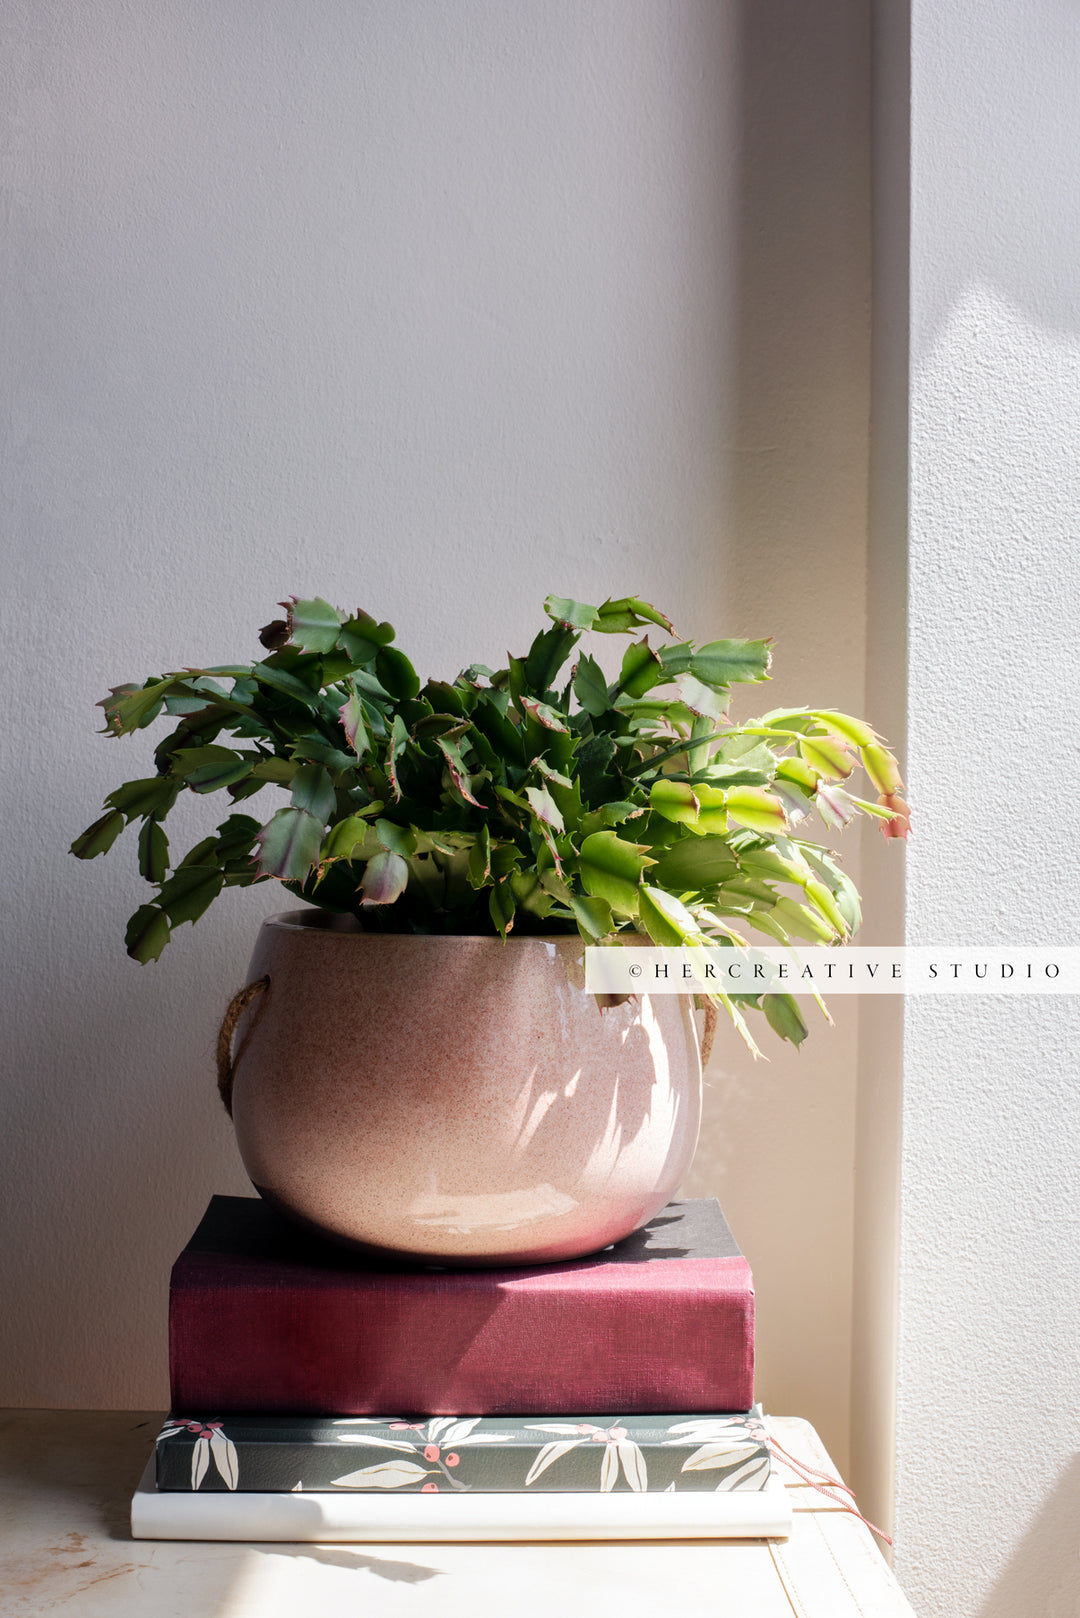 Green Plant on Notebbooks in Sunshine, Stock Image